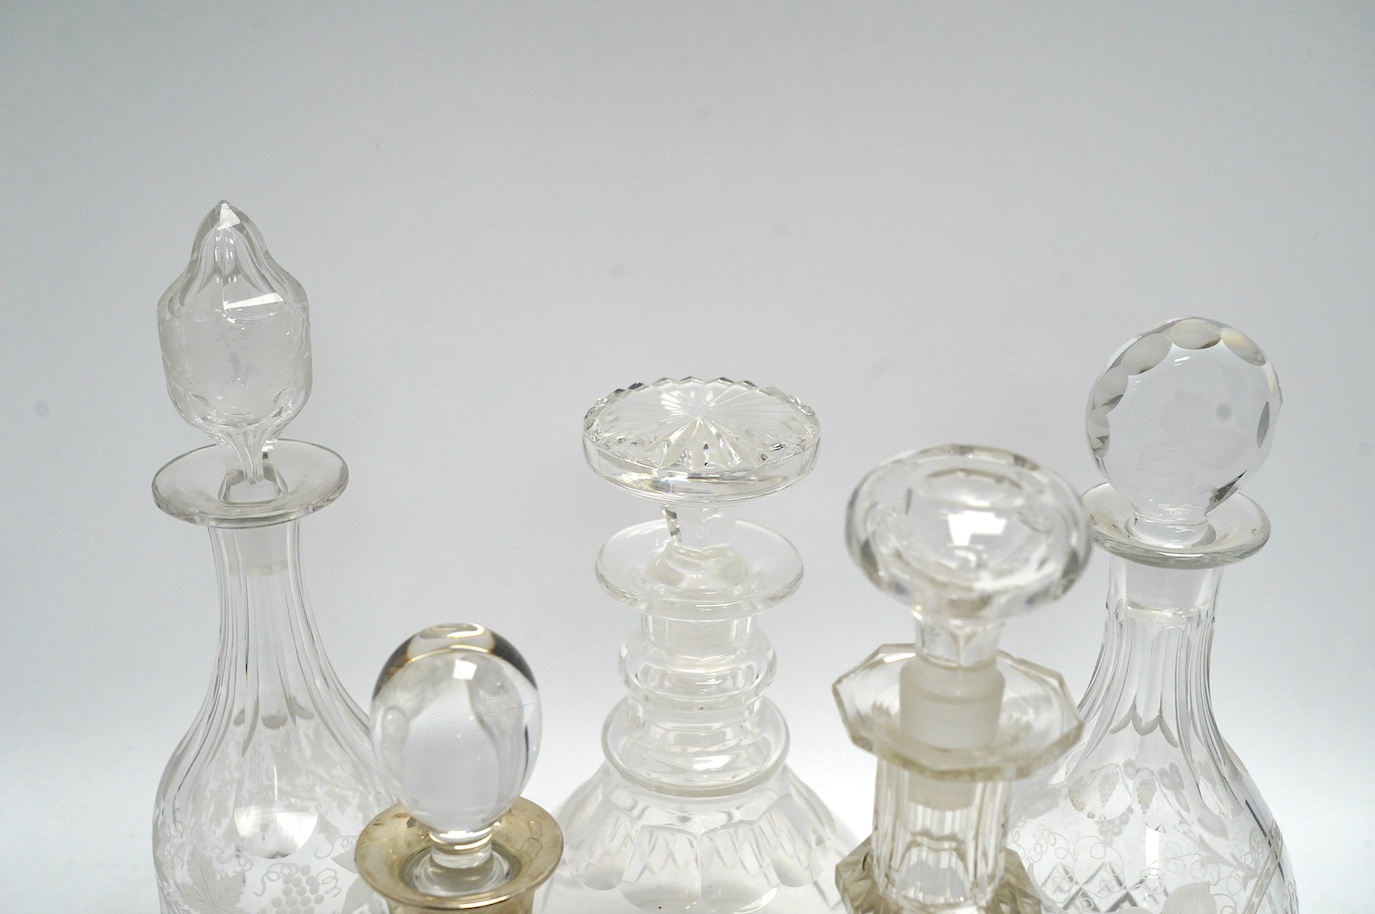 Thirteen Victorian and later glass decanters including three silver mounted examples, tallest 30cm high. Condition - varies, mostly fair